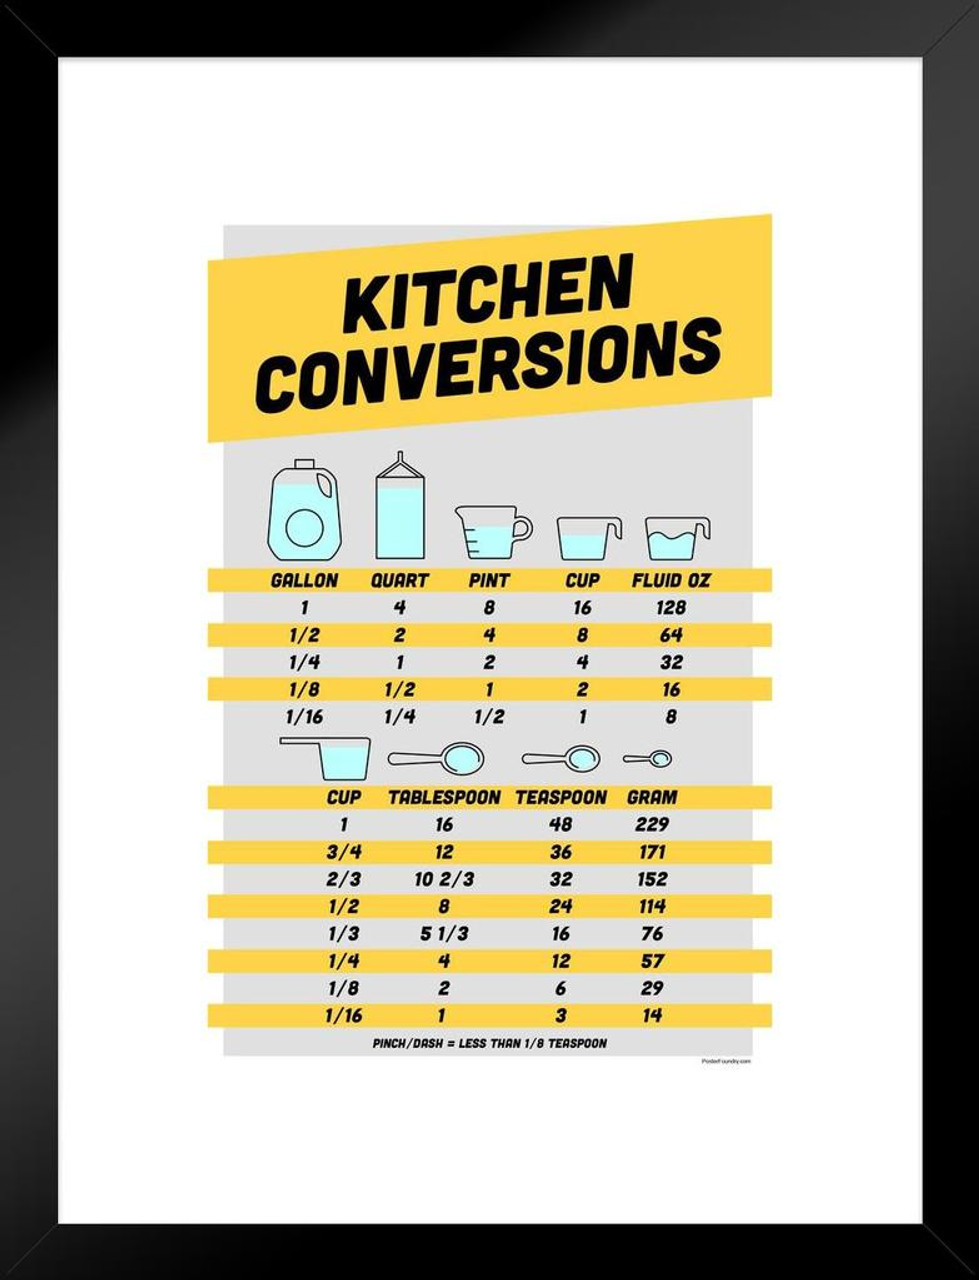 cooking measurement conversion chart grams to cups